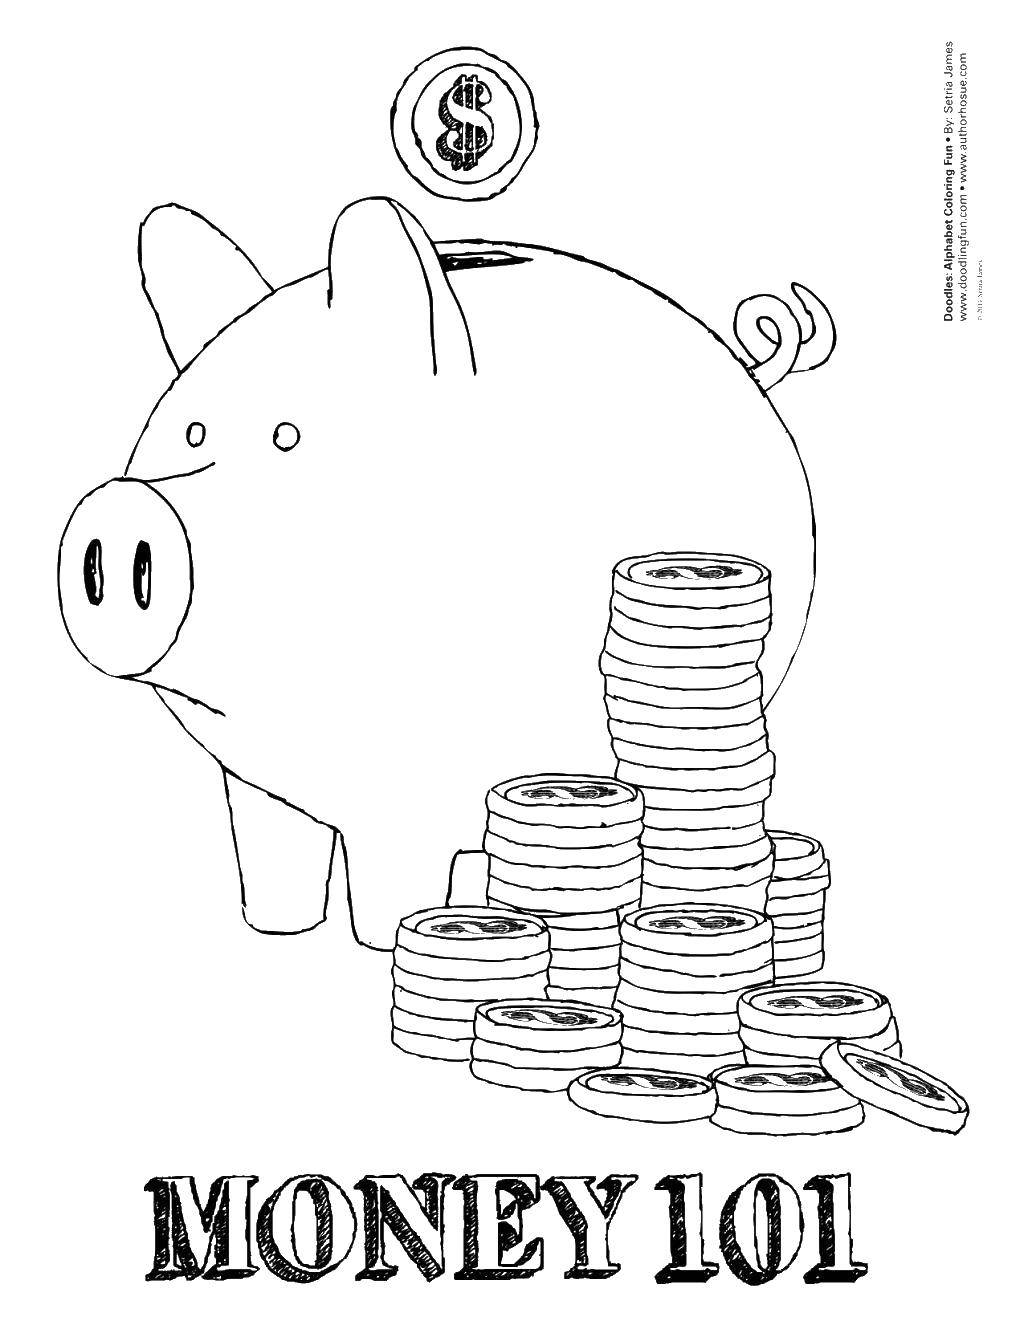 Coloring Money in the piggy Bank. Category The money. Tags:  The money.